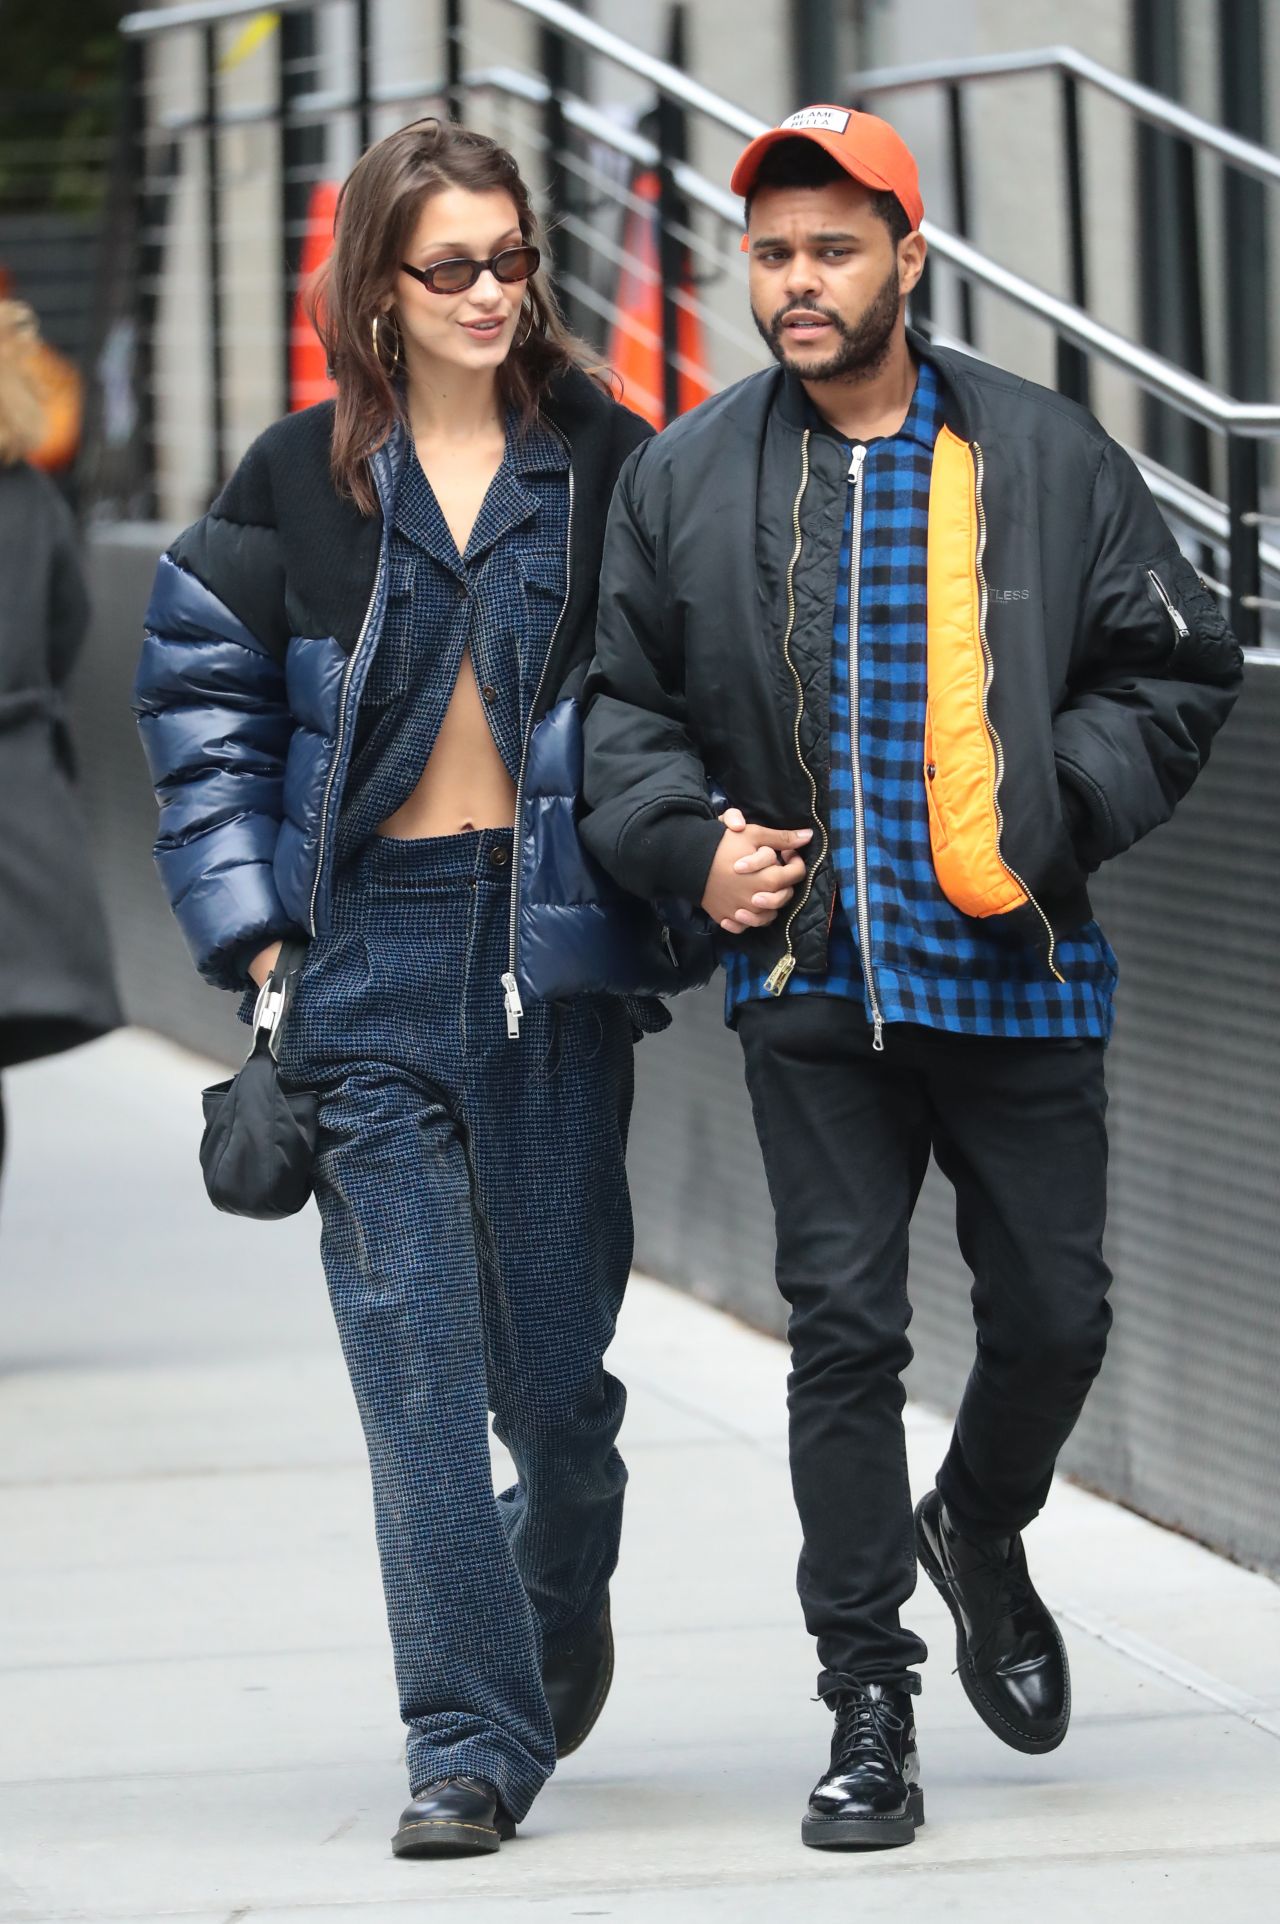 bella-hadid-and-the-weeknd-out-in-new-york-city-10-29-2018-2.jpg